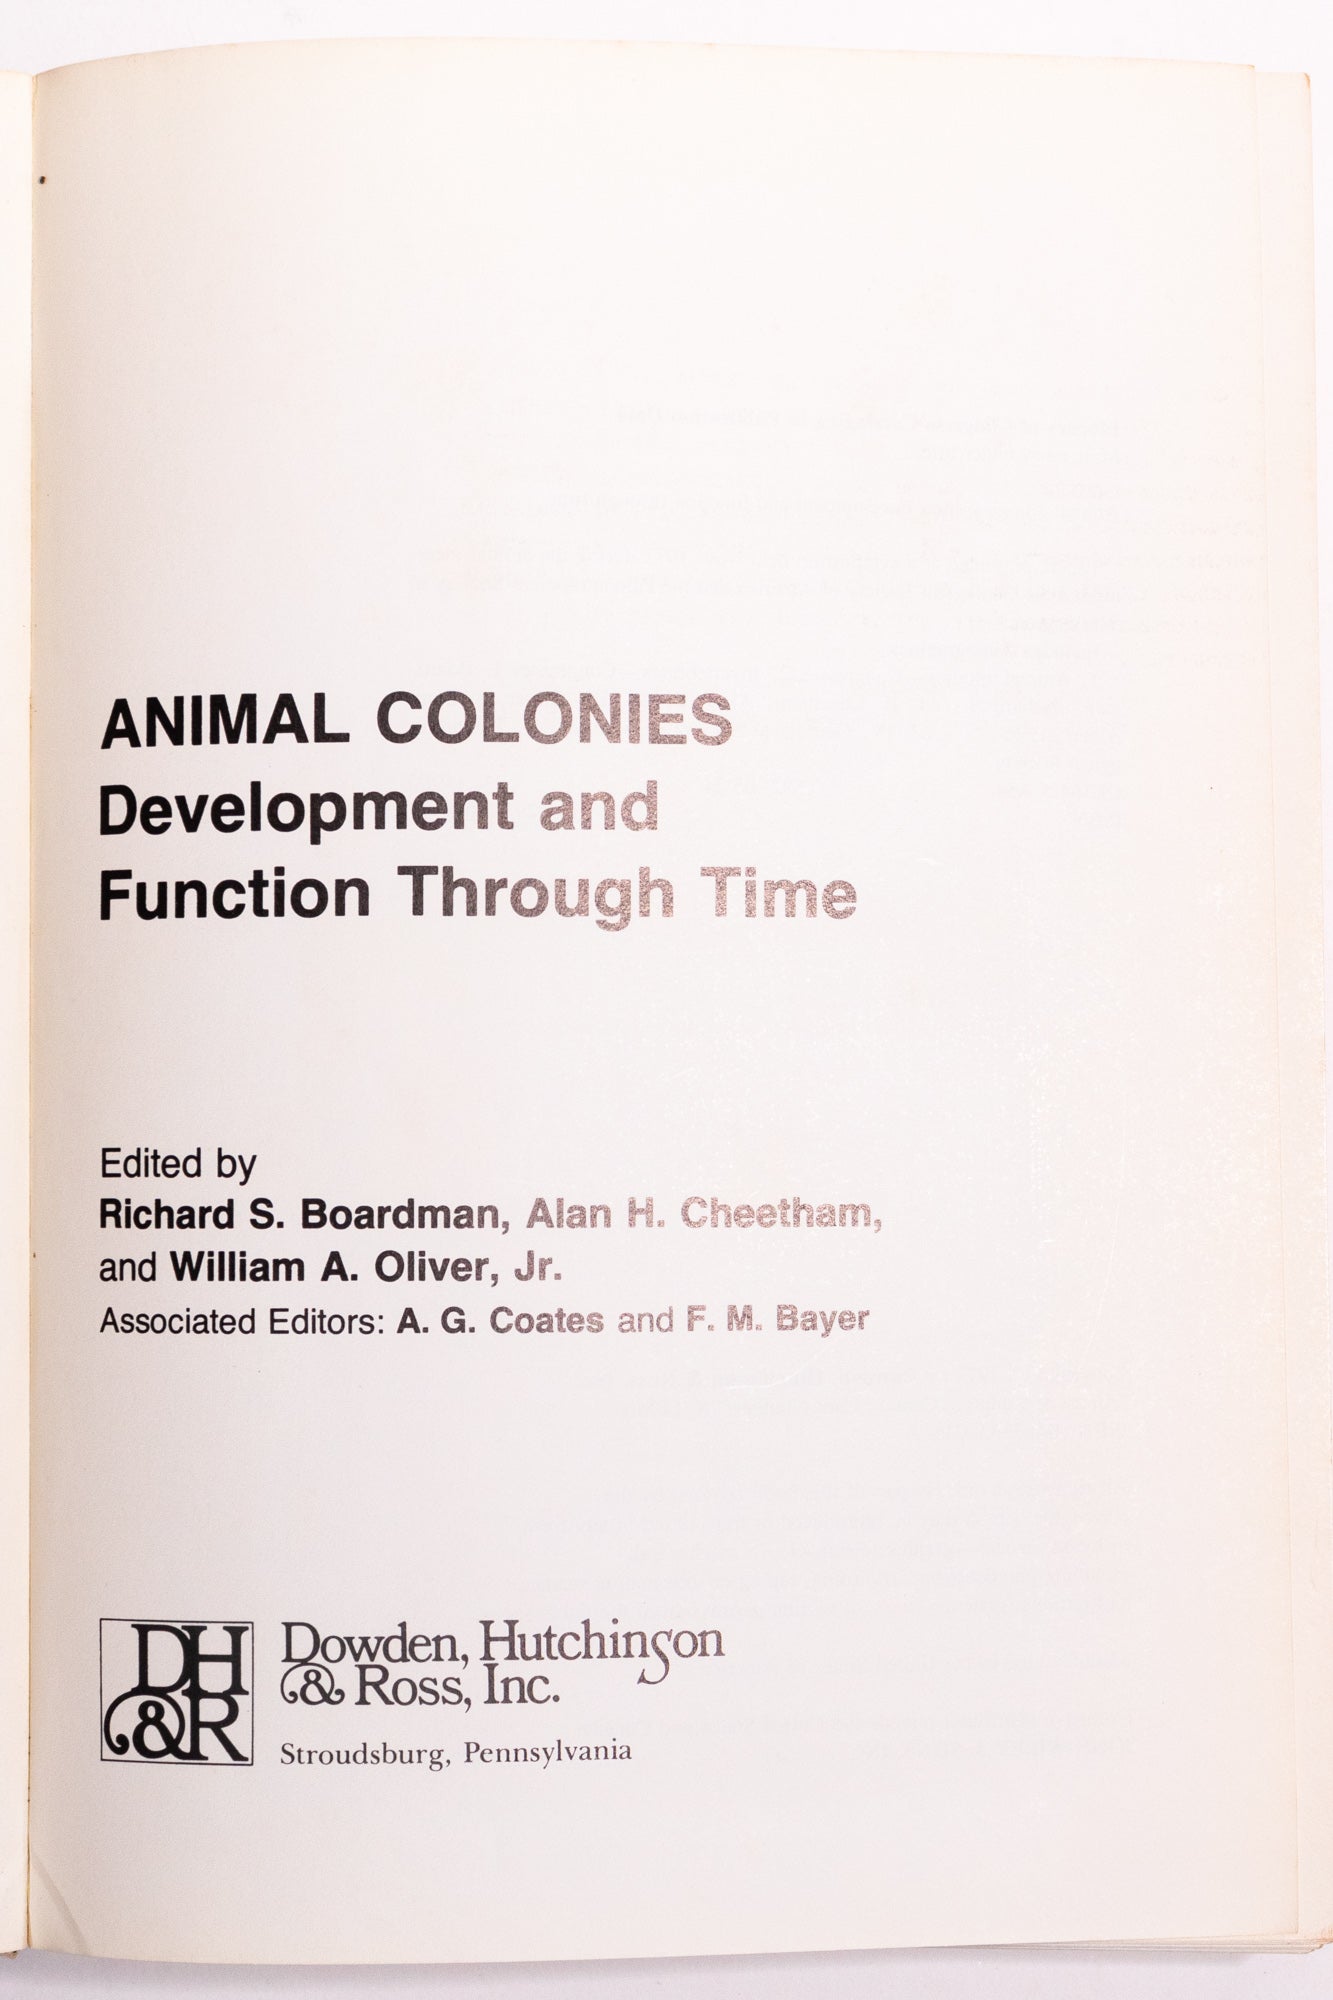 Animal Colonies: Development and Function Through Time